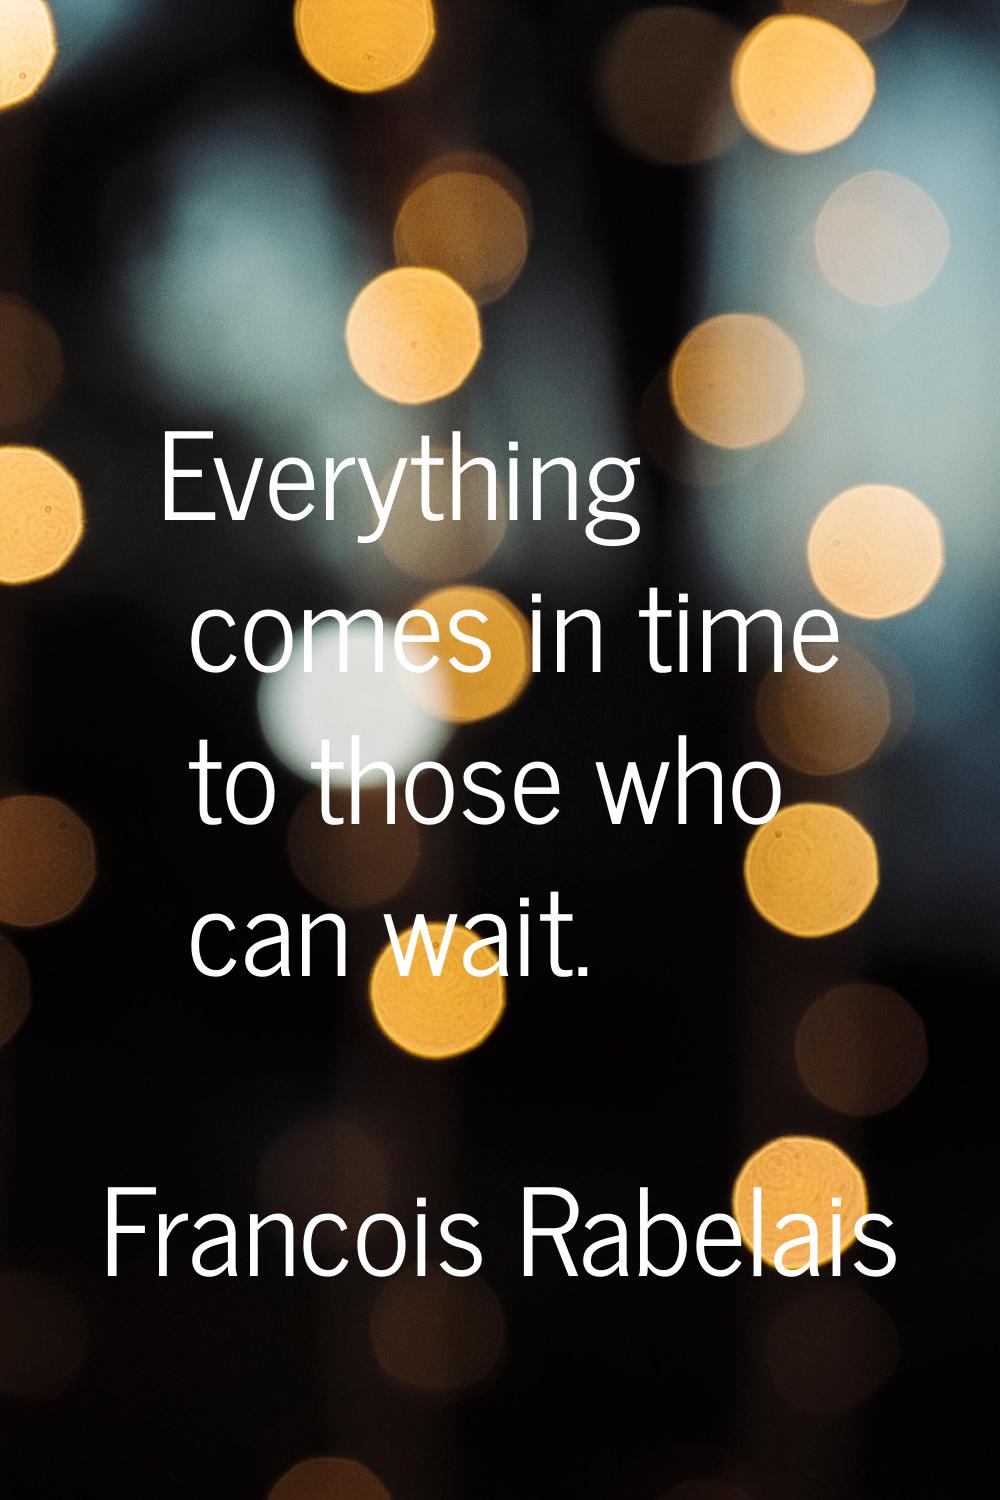 Everything comes in time to those who can wait.